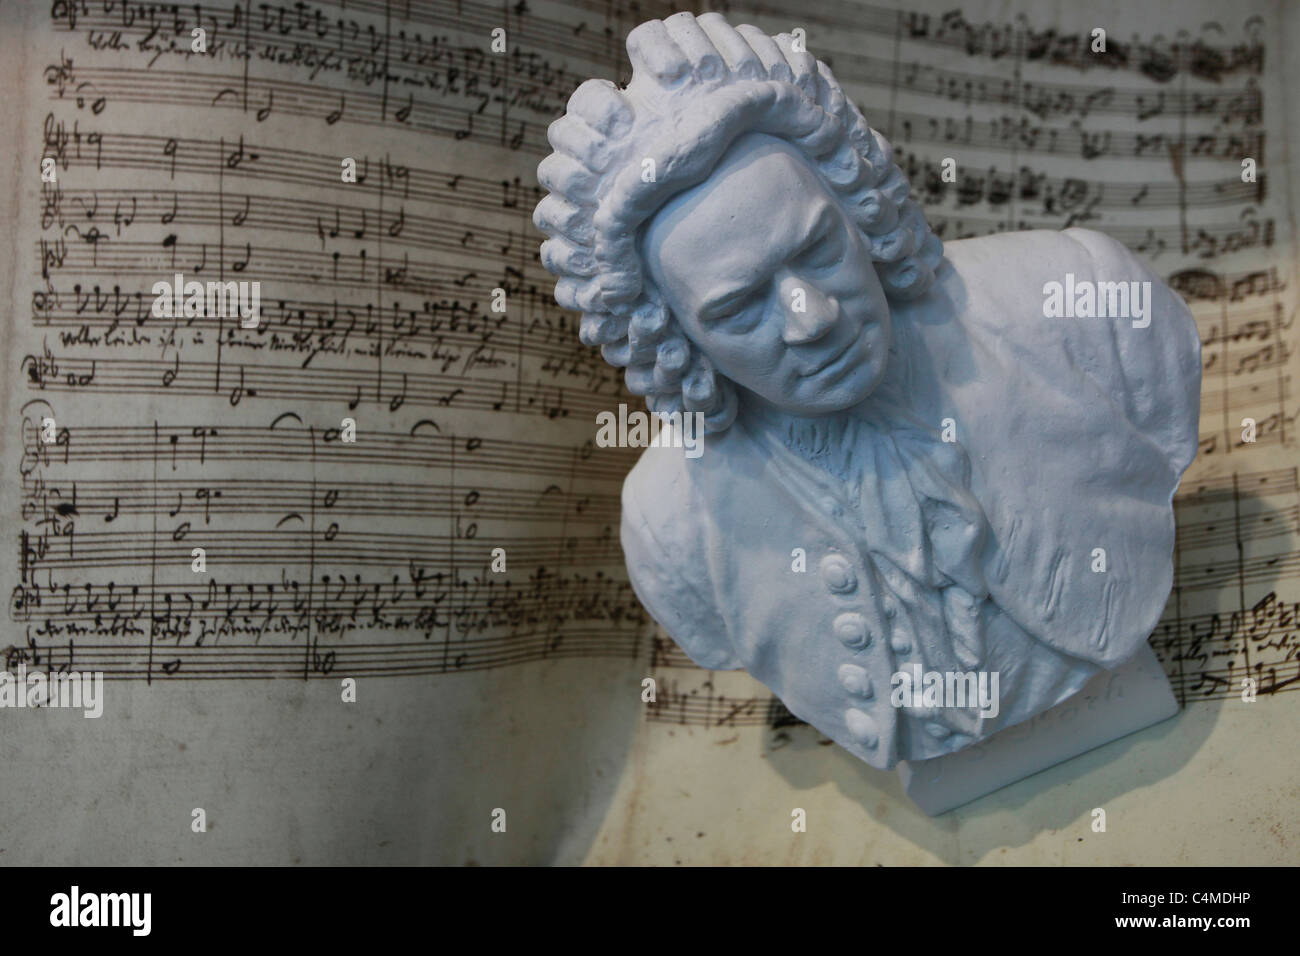 Sculpted bust of the German composer Johann Sebastian Bach displayed in a shop window in Leipzig Saxony Eastern Germany Stock Photo